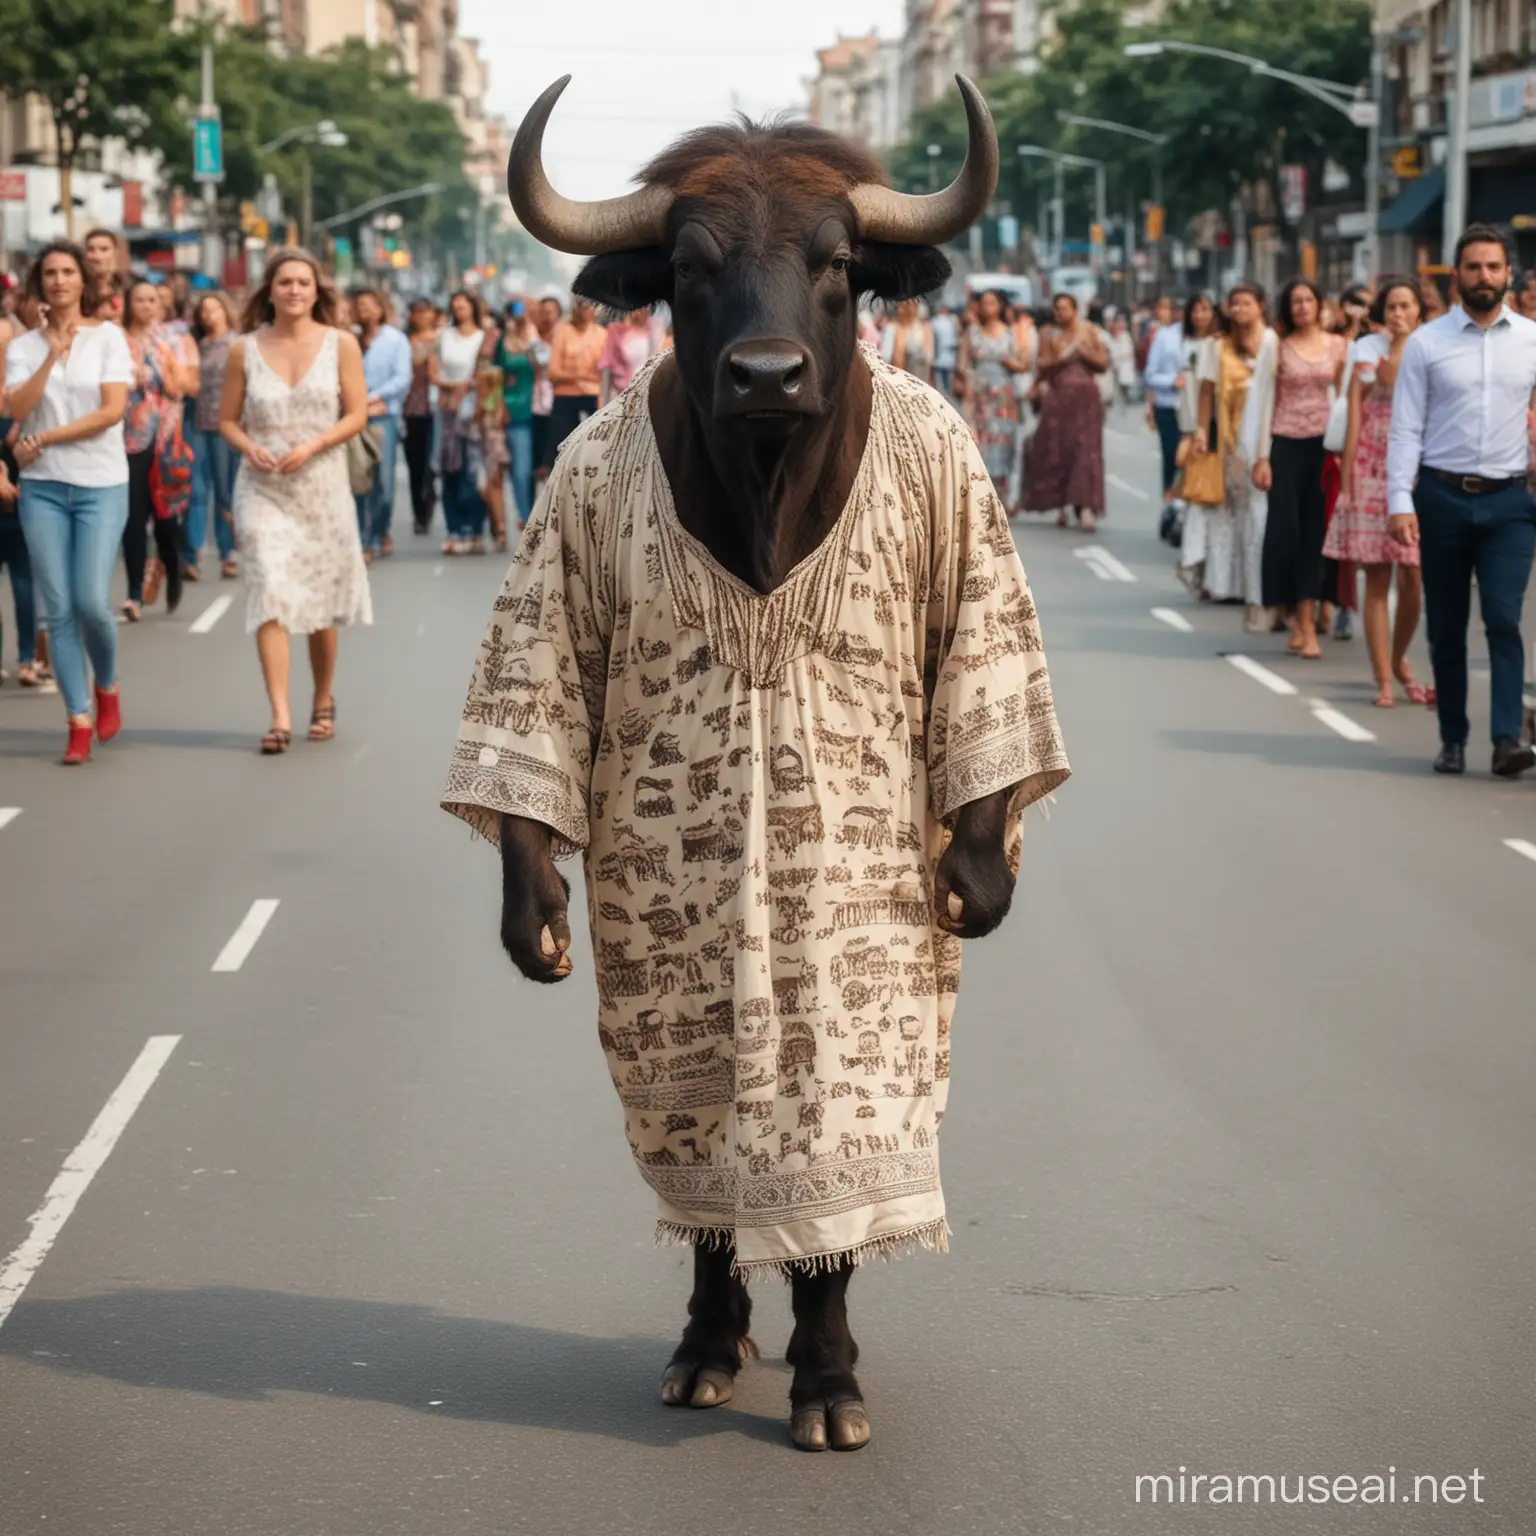 One buffalo wear a bridel dress.stand in the middle of street.many people watching it and laughed.